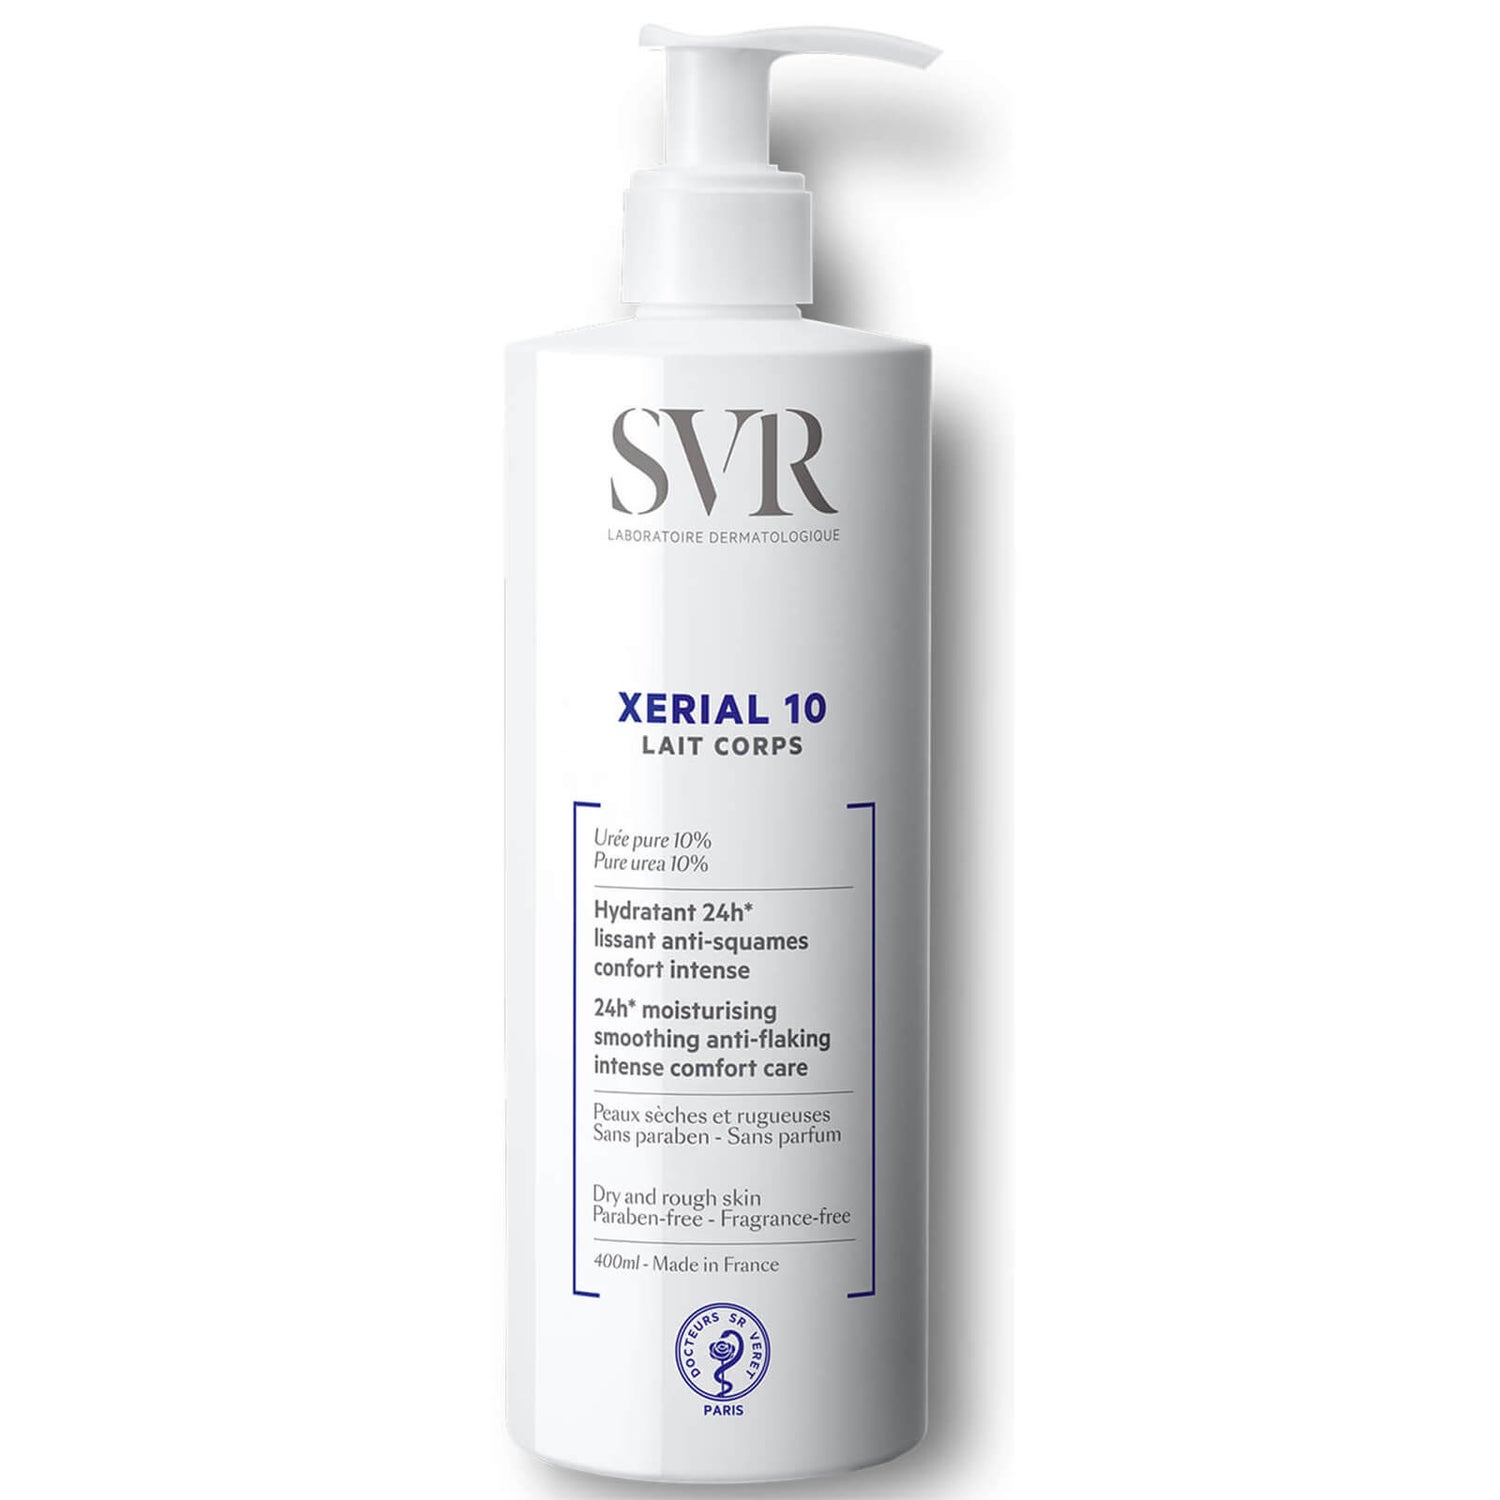 SVR Xerial 10 Body Lotion for Extremely Dehydrated + Flaking Skin - 400ml